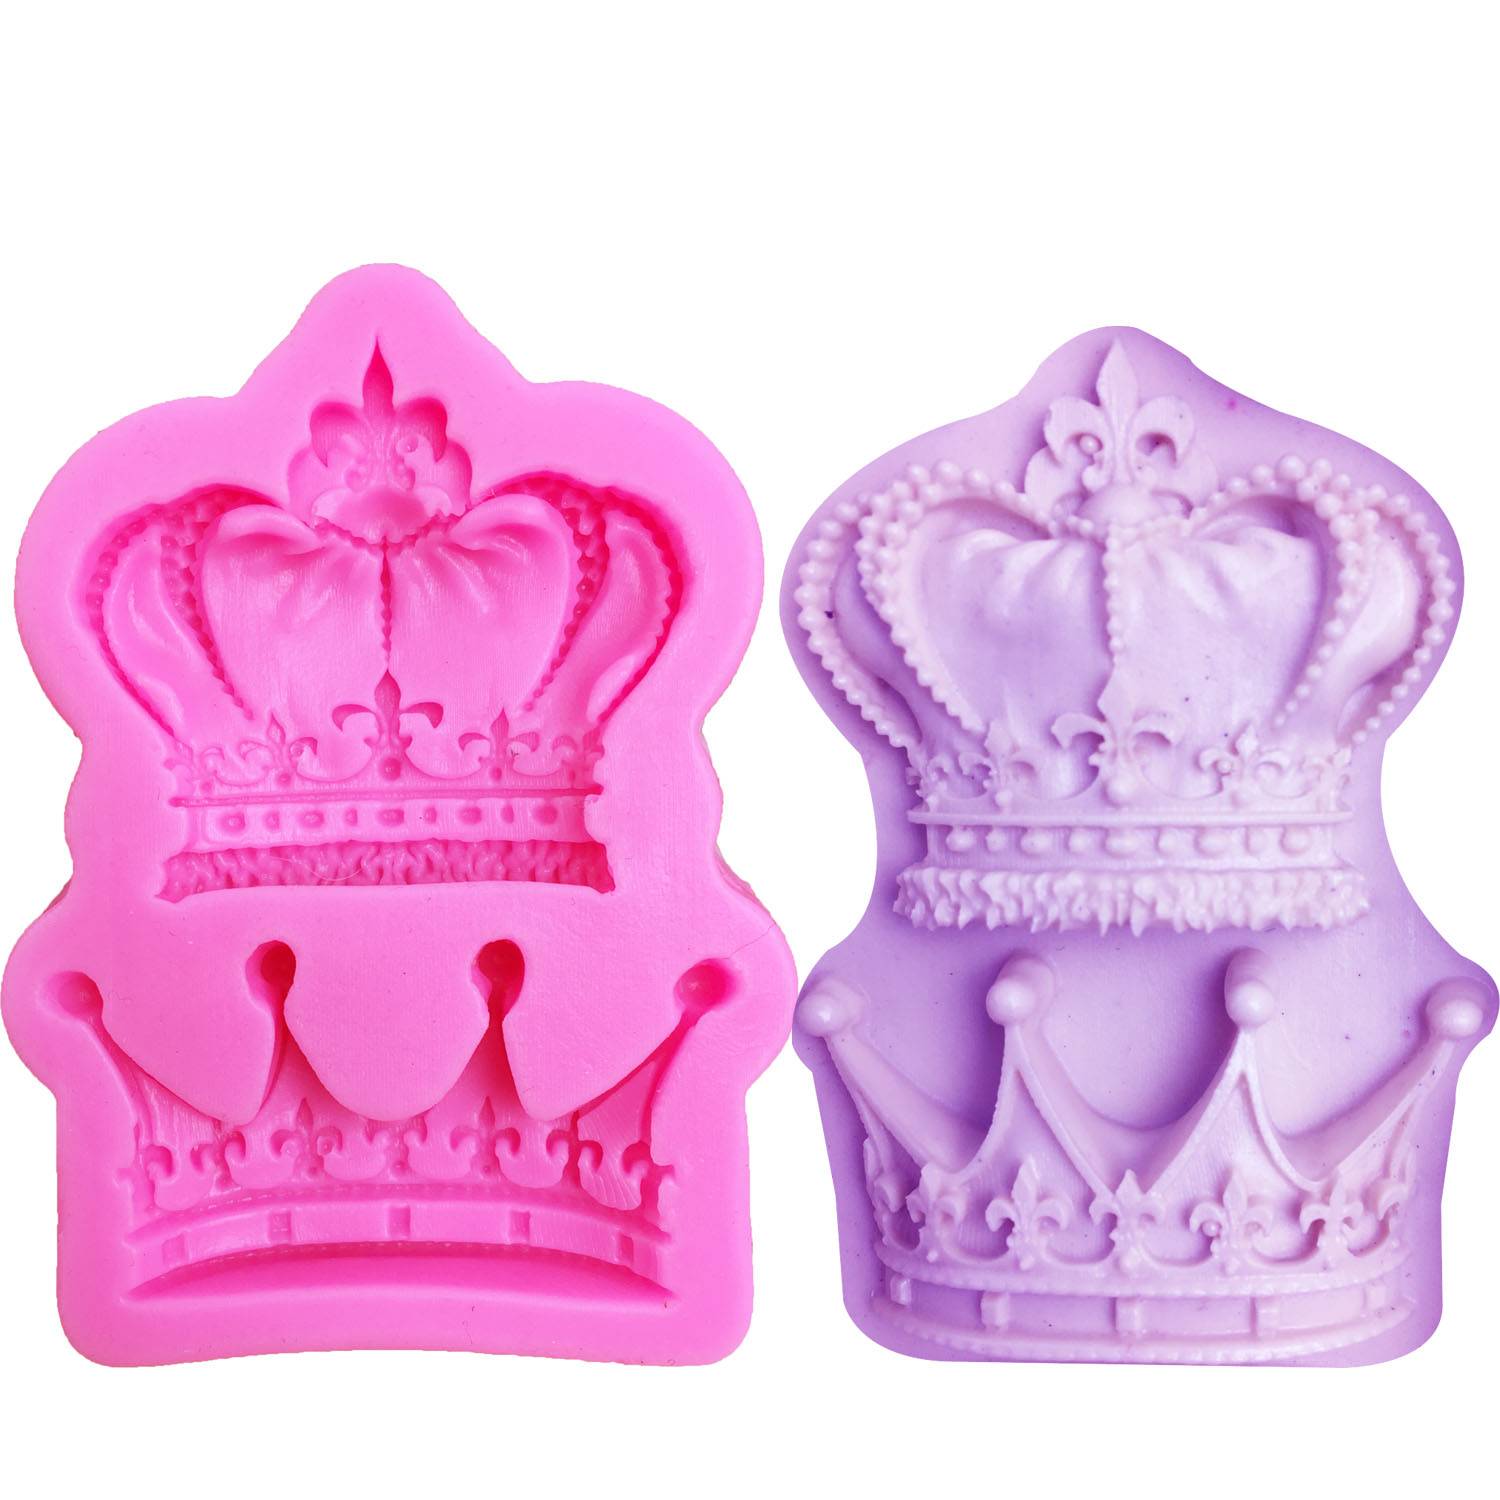 Crown Shaped Silicone Fandont Mold